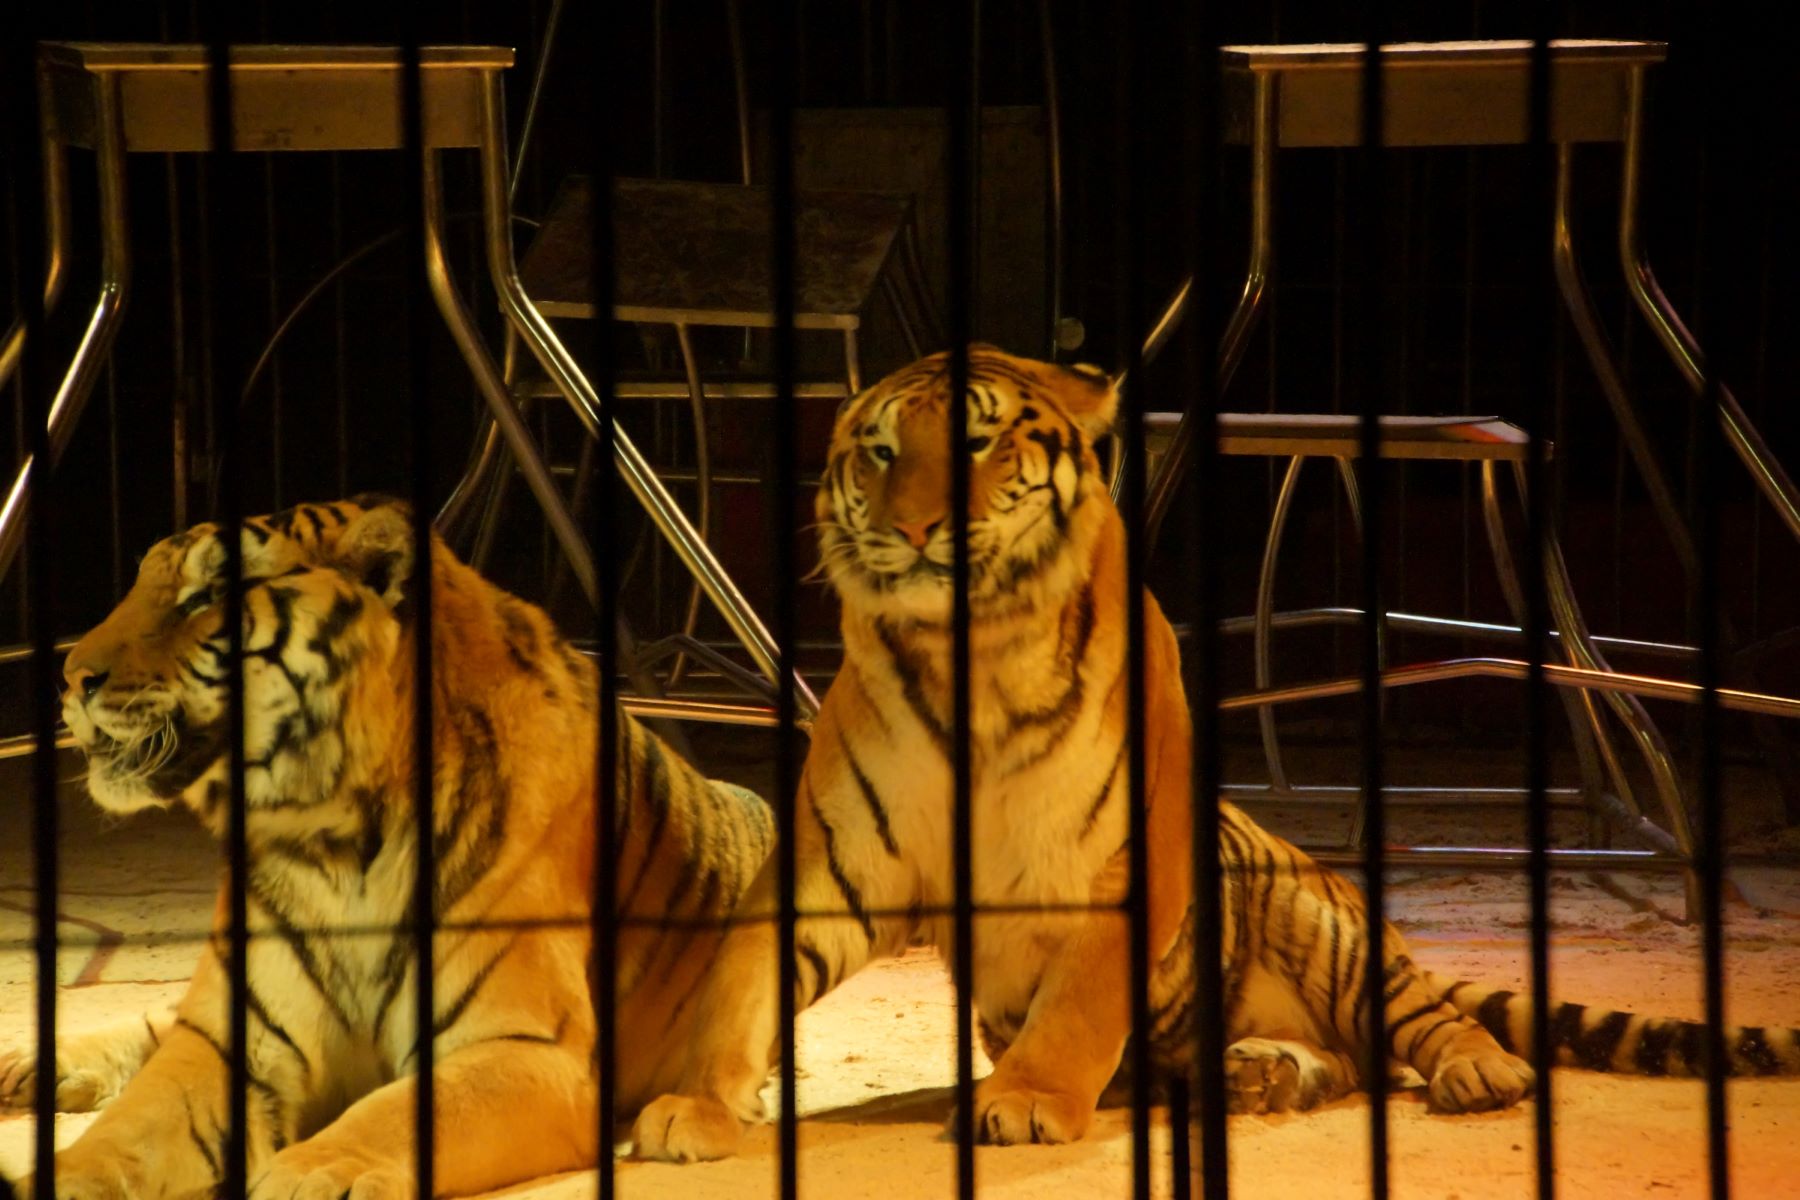 Two tigers in a cage